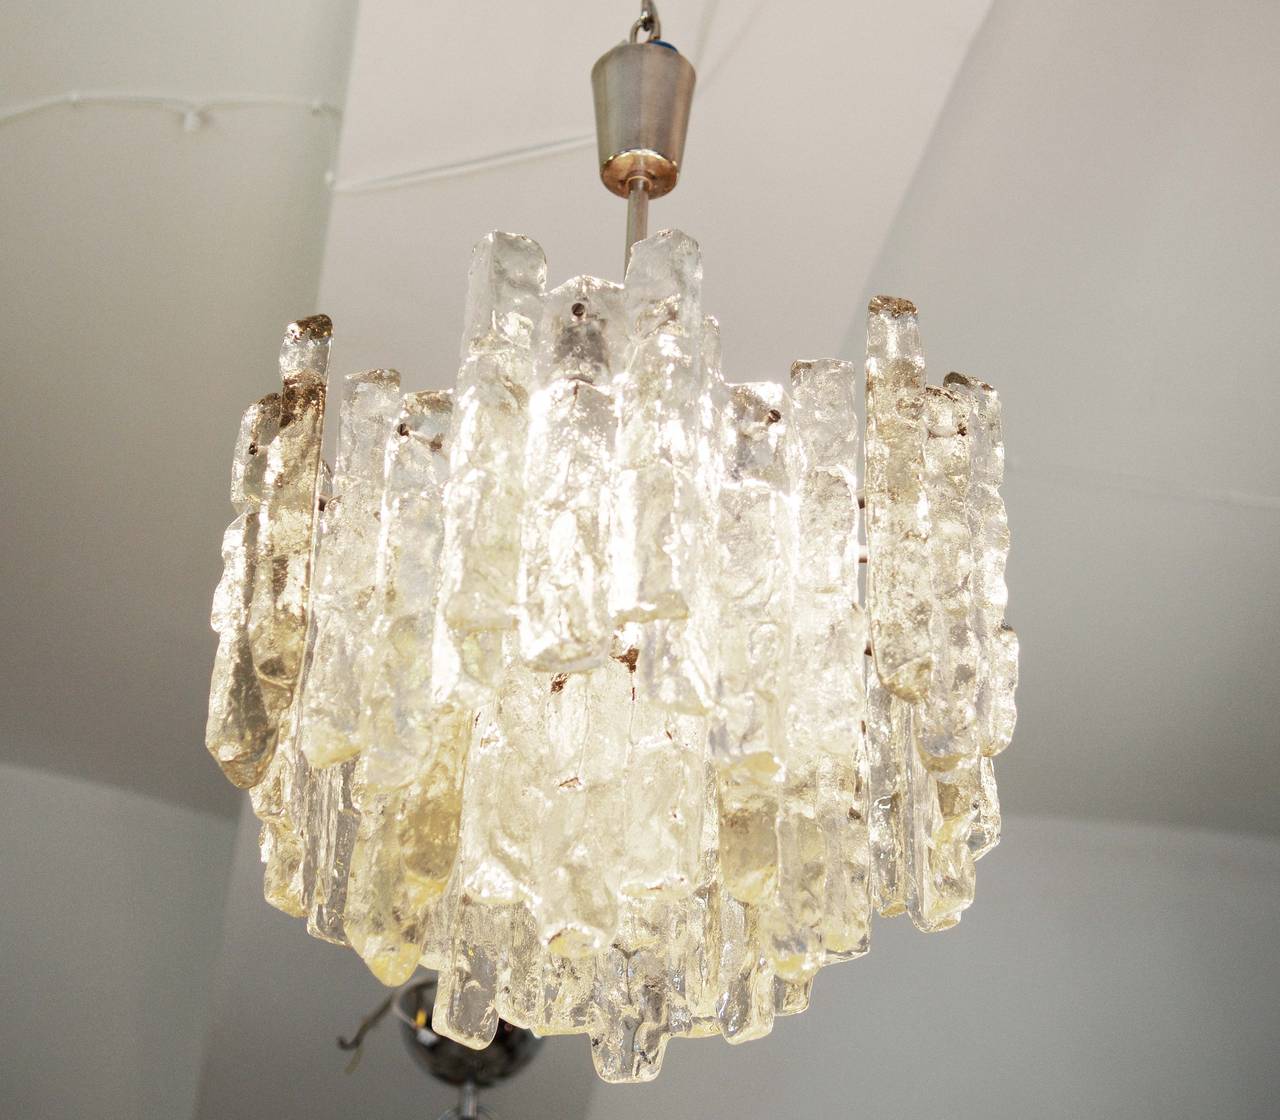 Kalmar Ice Glass Chandelier In Excellent Condition For Sale In Vienna, AT